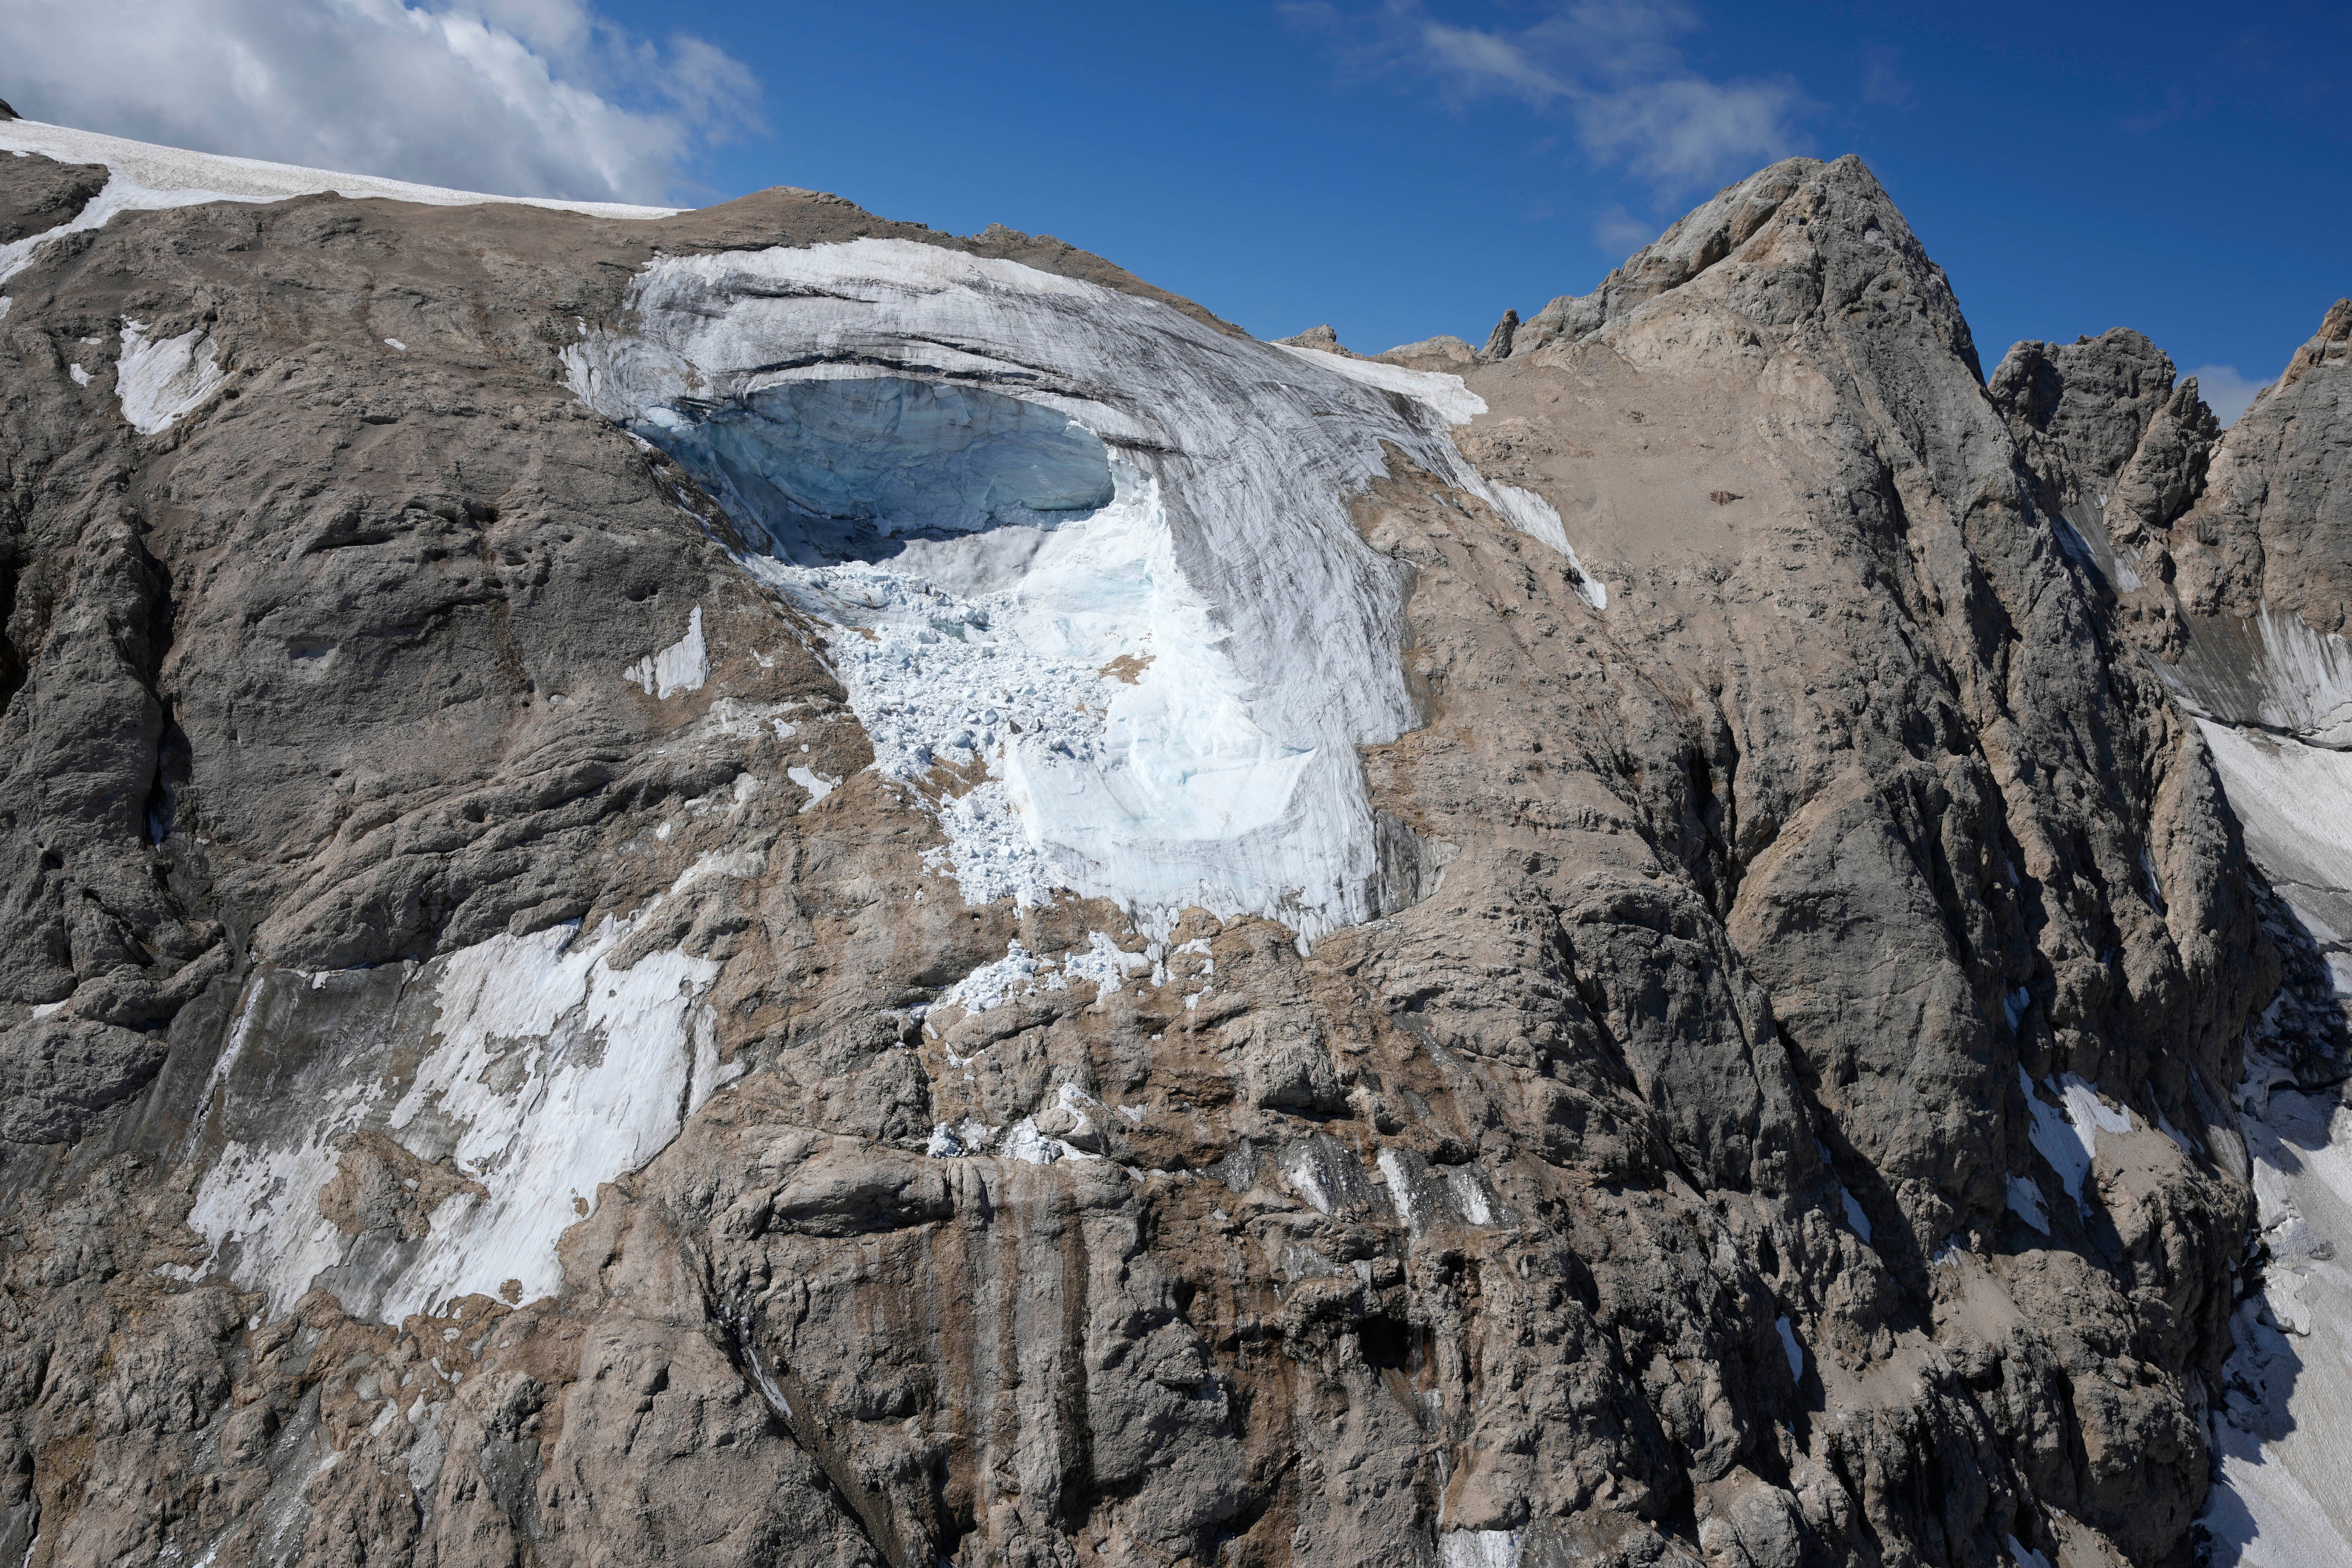 A view of the glacier from a rescue helicopter. (Photo: Luca Bruno, AP)